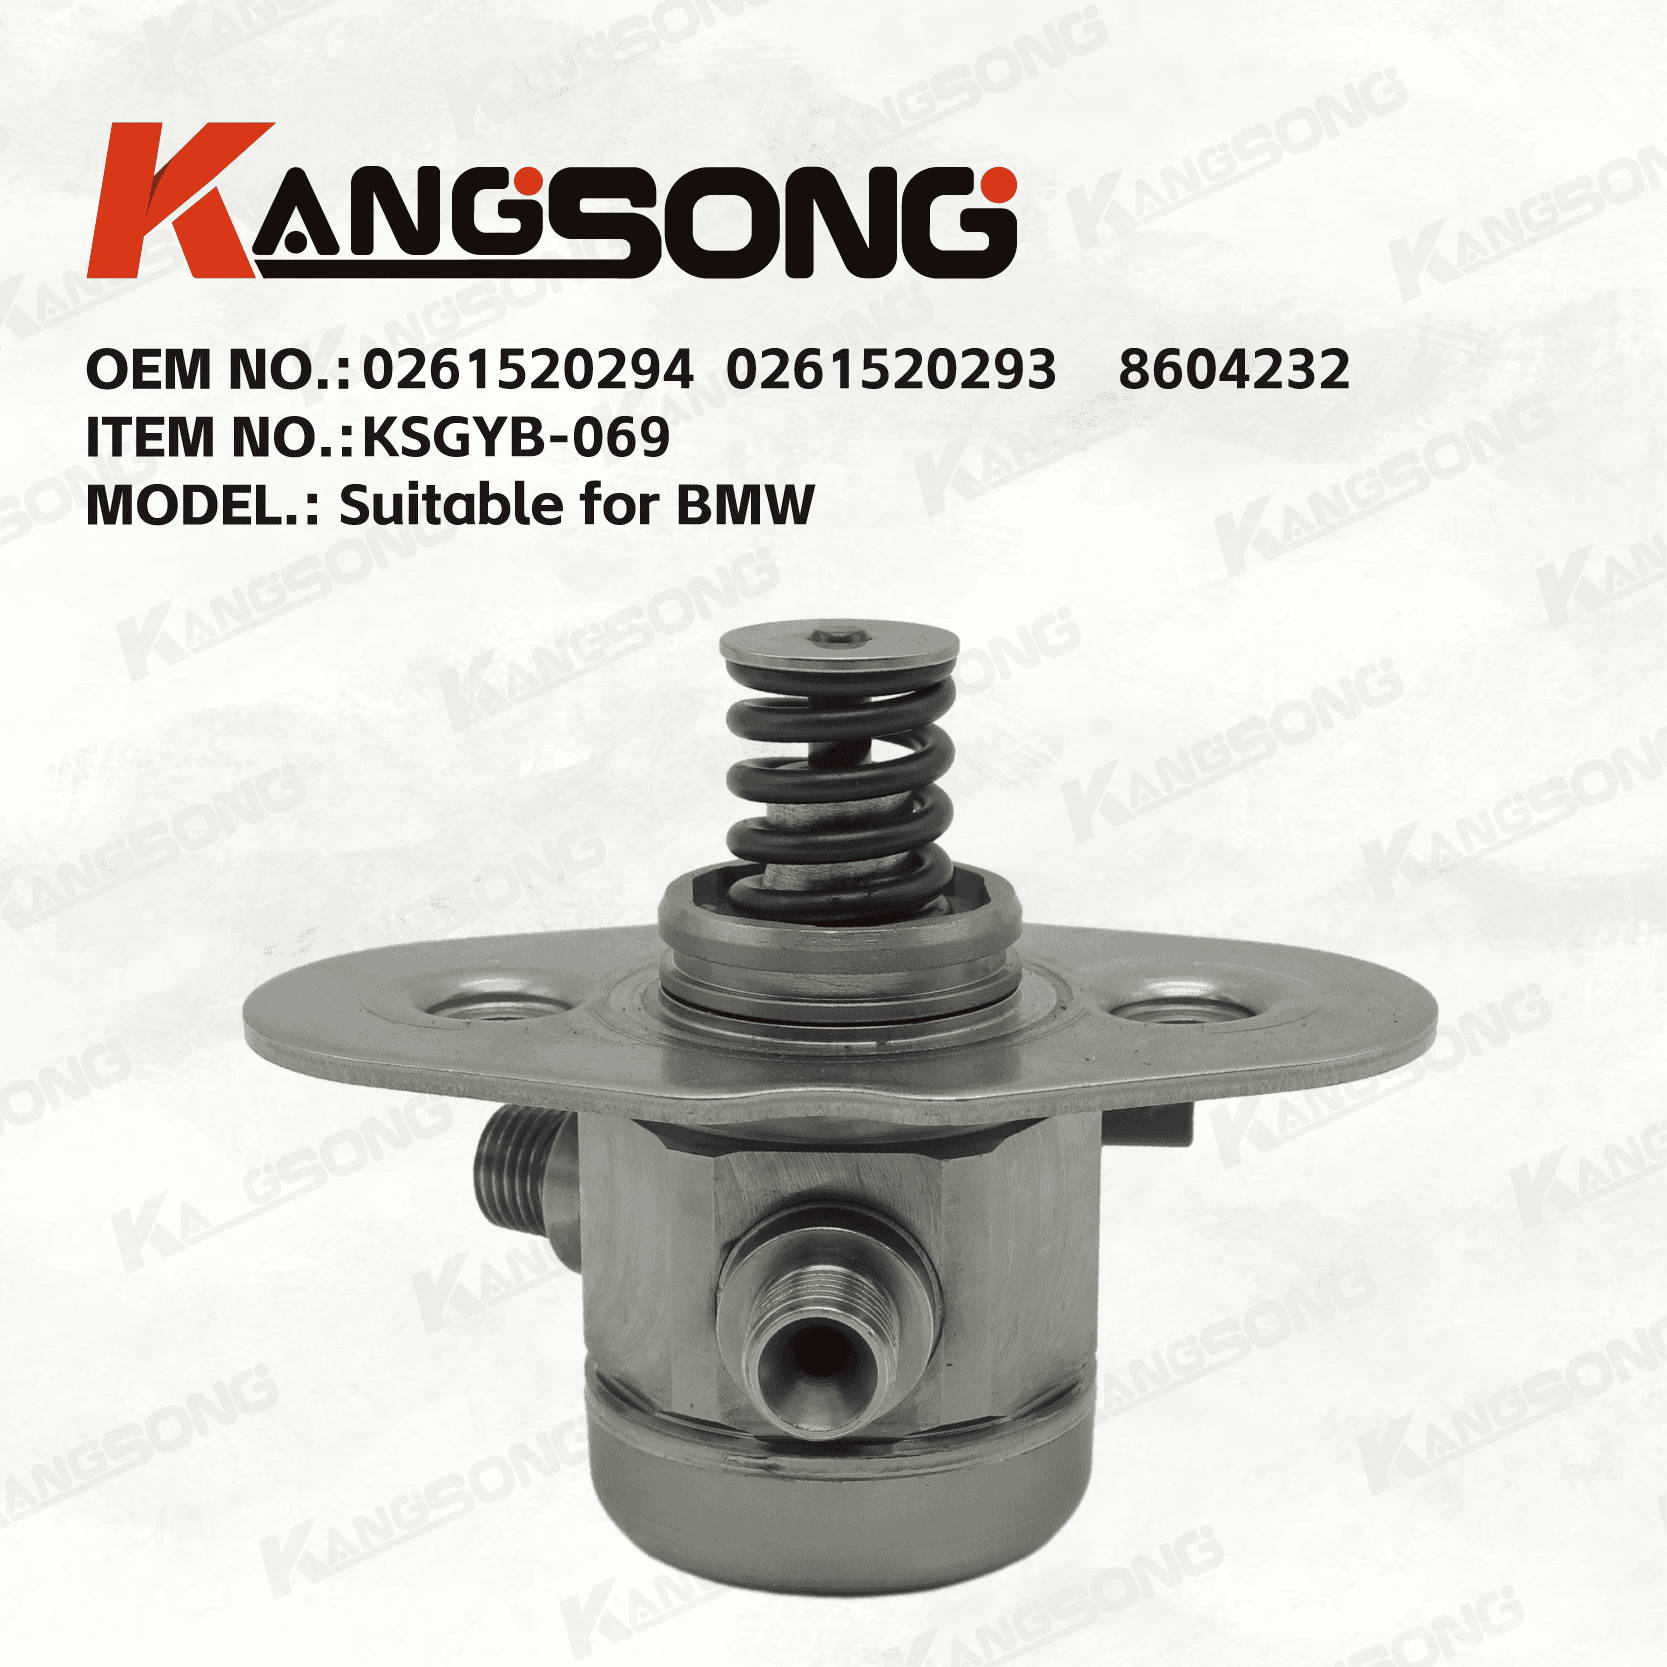 Applicable to BMW/0261520294  0261520293  8604232 /High pressure fuel pump/KSGYB-069